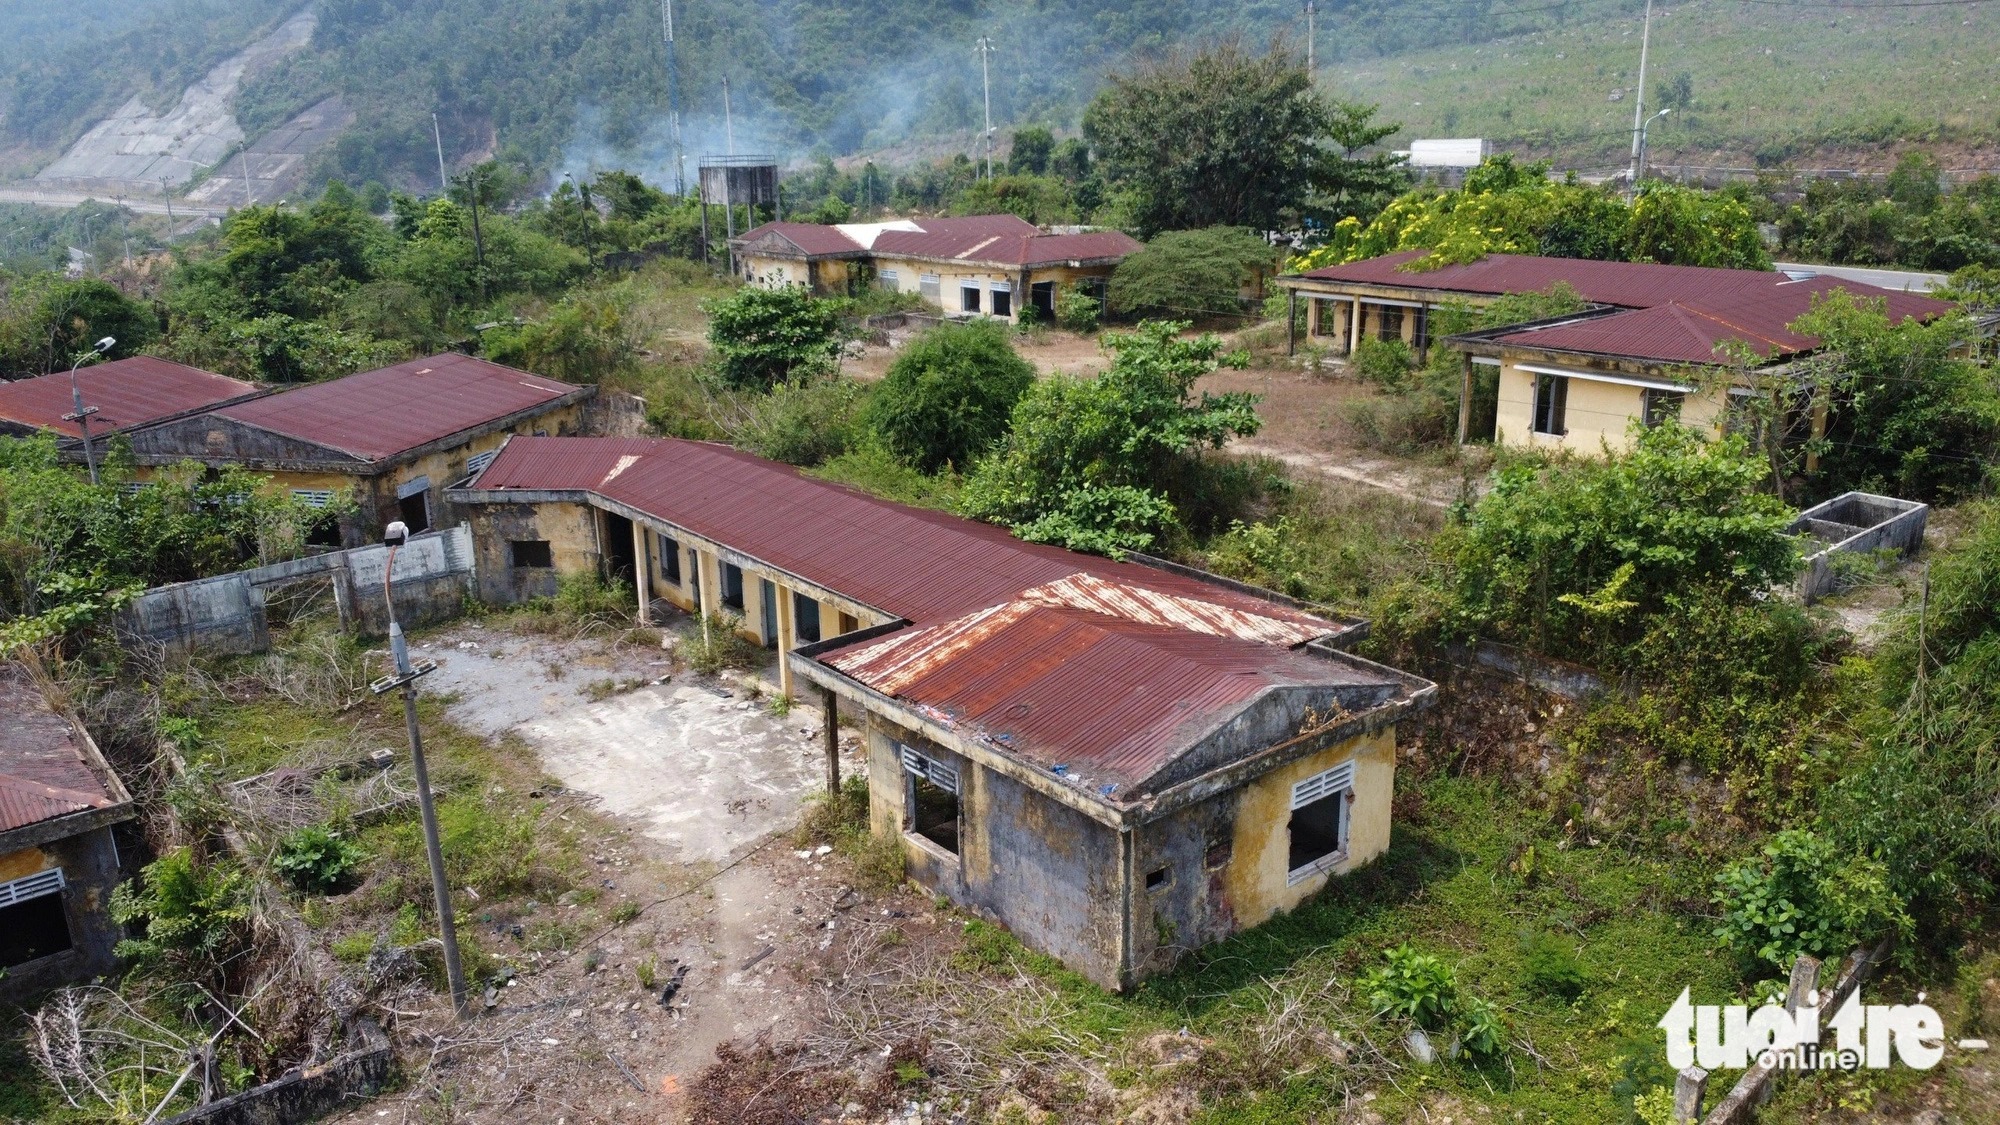 The administration of Hoa Vang District will invite bids for a project to transform and develop the area where the abandoned vocational training center is located. Photo: HS / Tuoi Tre